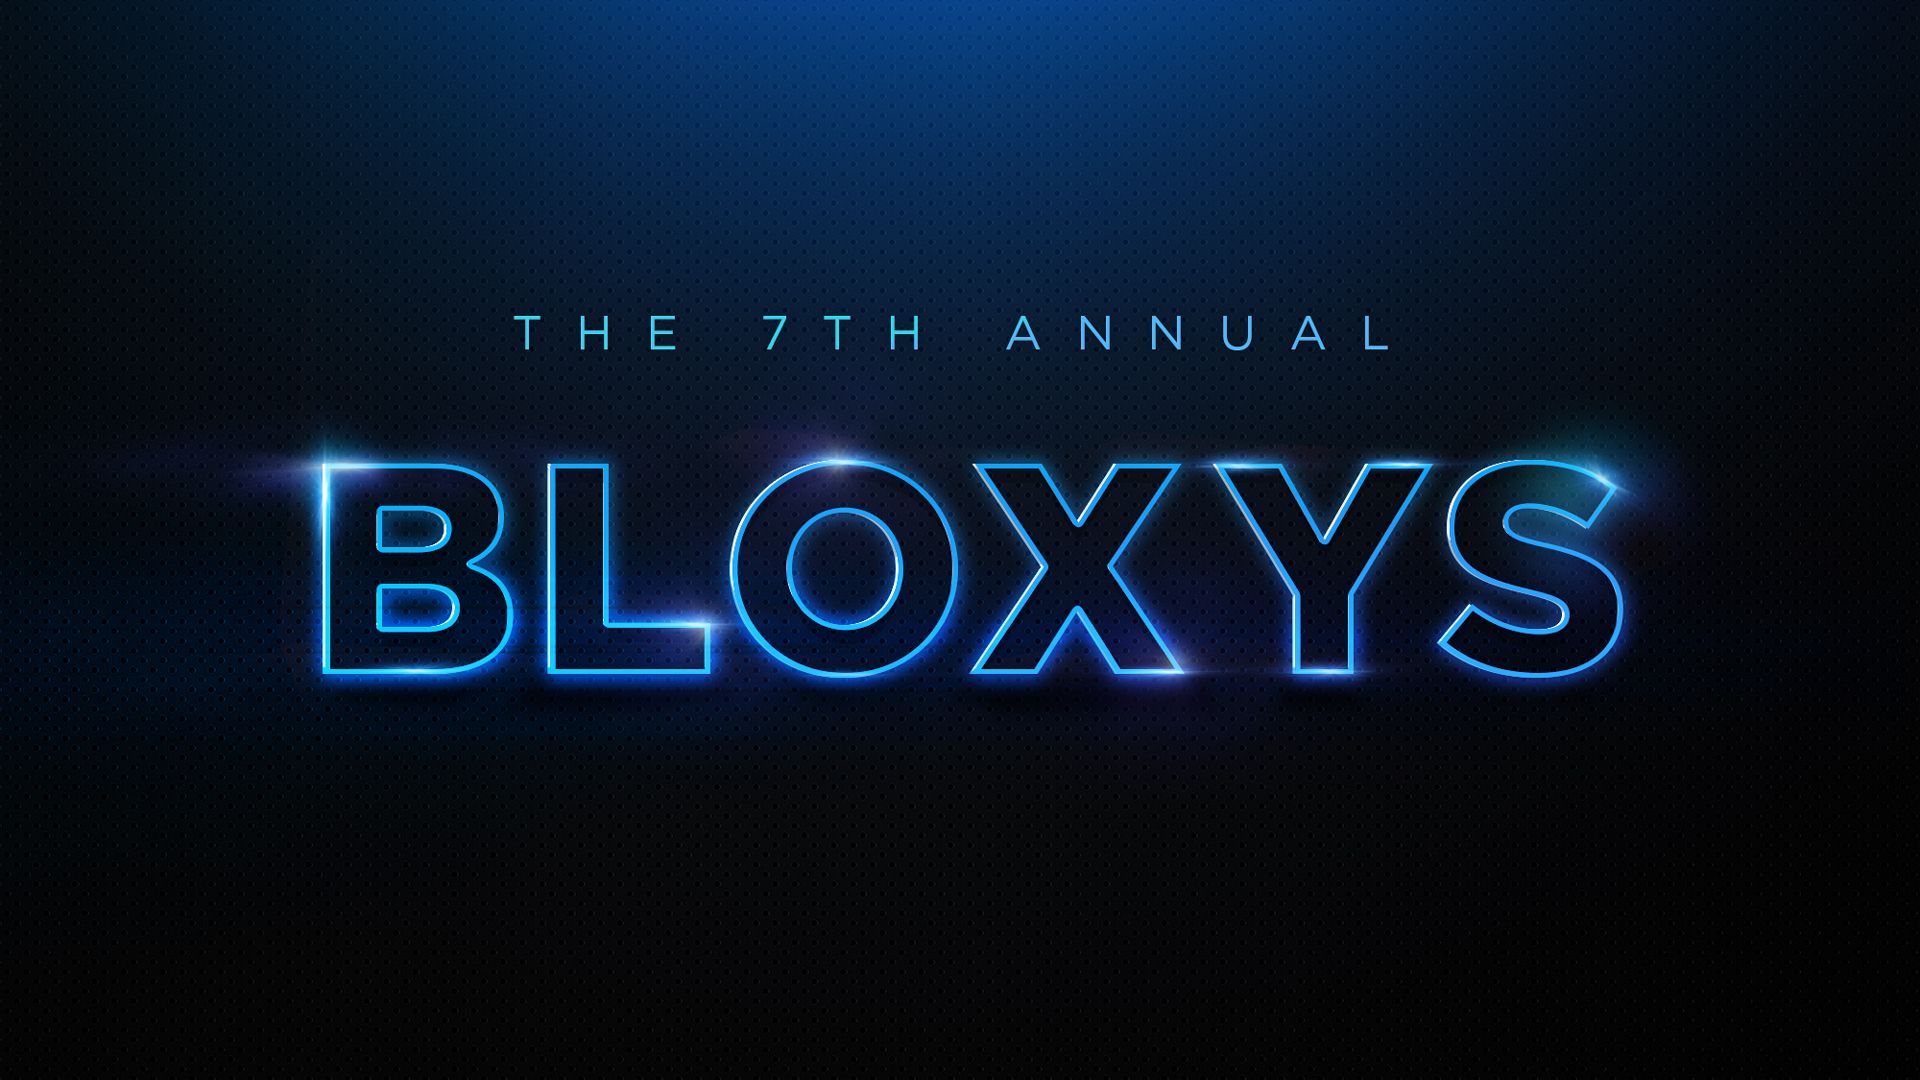 Cast Your Votes for the 7th Annual Bloxy Awards Blog